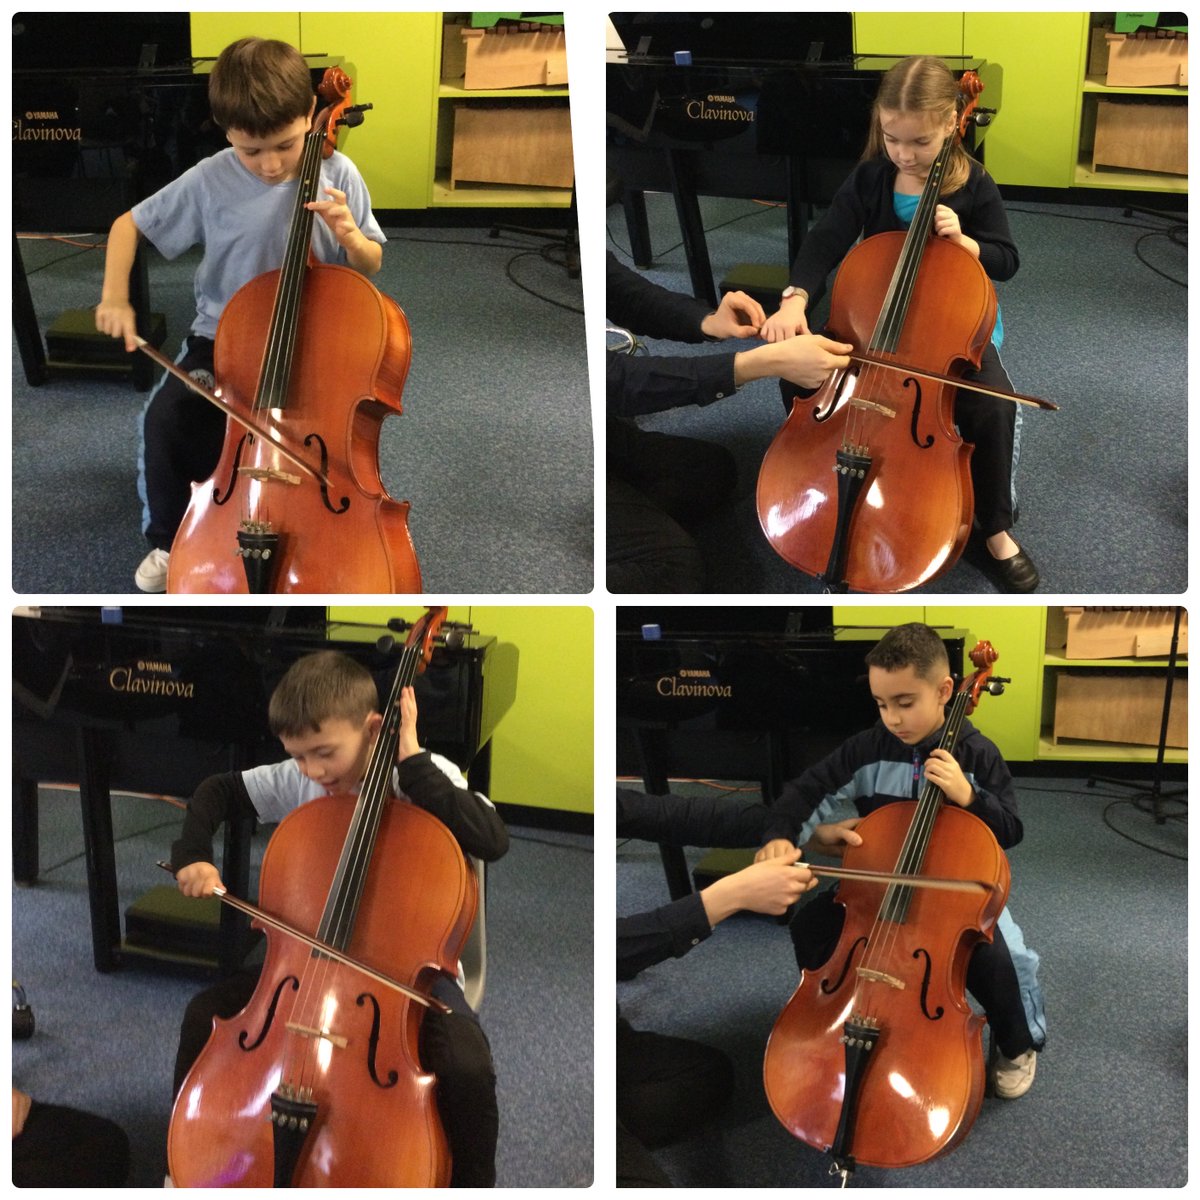 To continue with the orchestral theme,
@UptonForm2 had a little go on a cello today
@UptonPrePrep
@UptonHead
#Uptonjourney